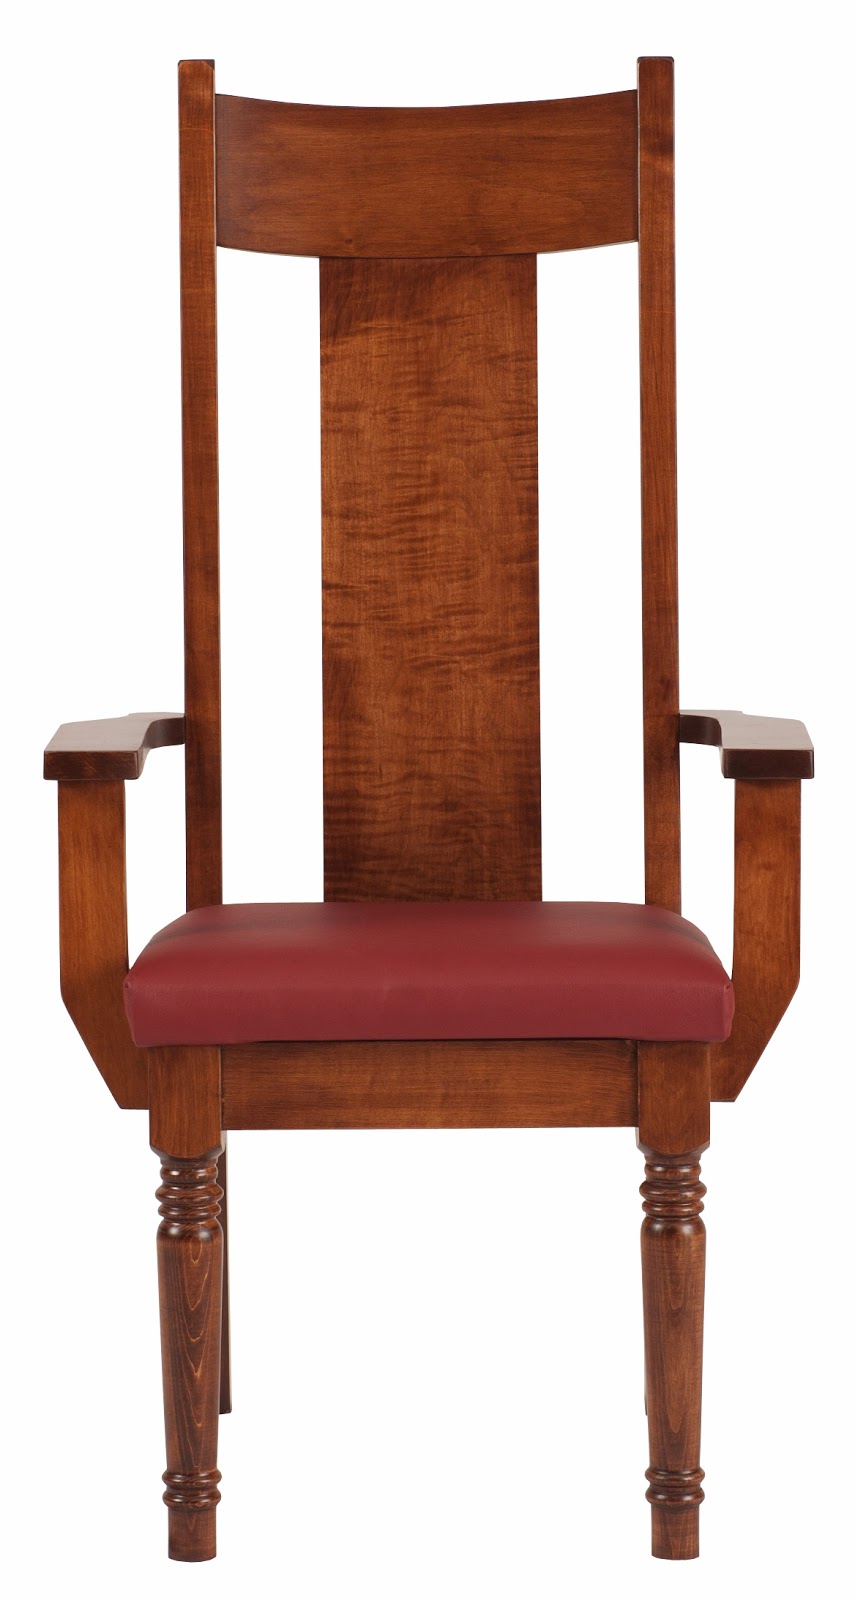  Farmhouse  Dining Chair  Dining Room Chair  in the 